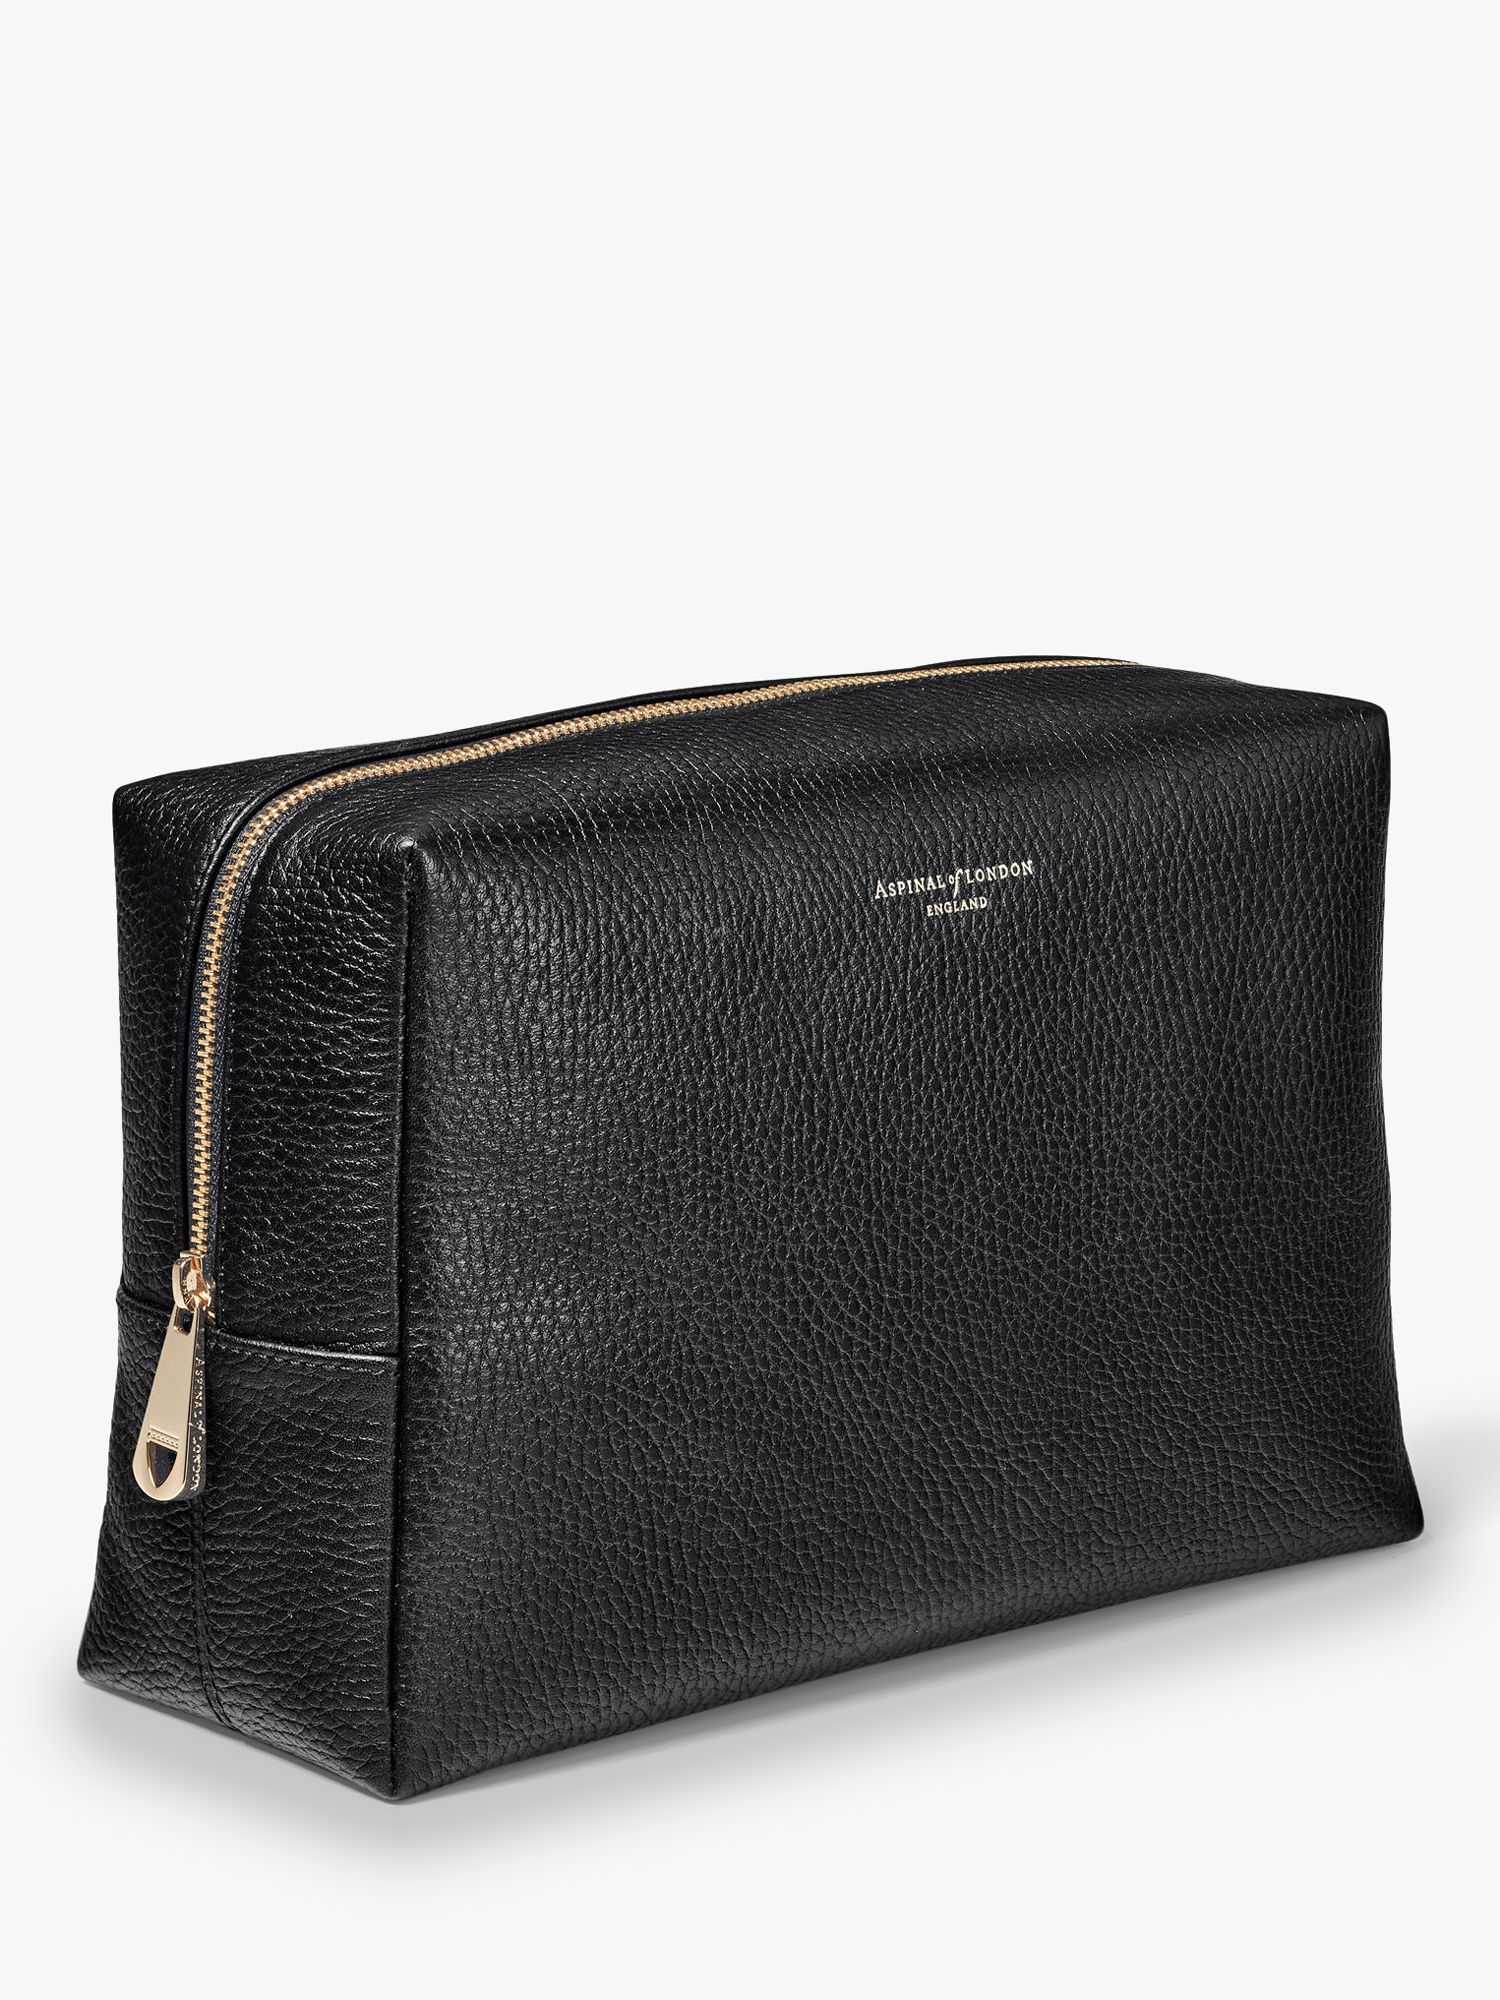 Aspinal of London Large Pebble Leather Toiletry Bag, Black